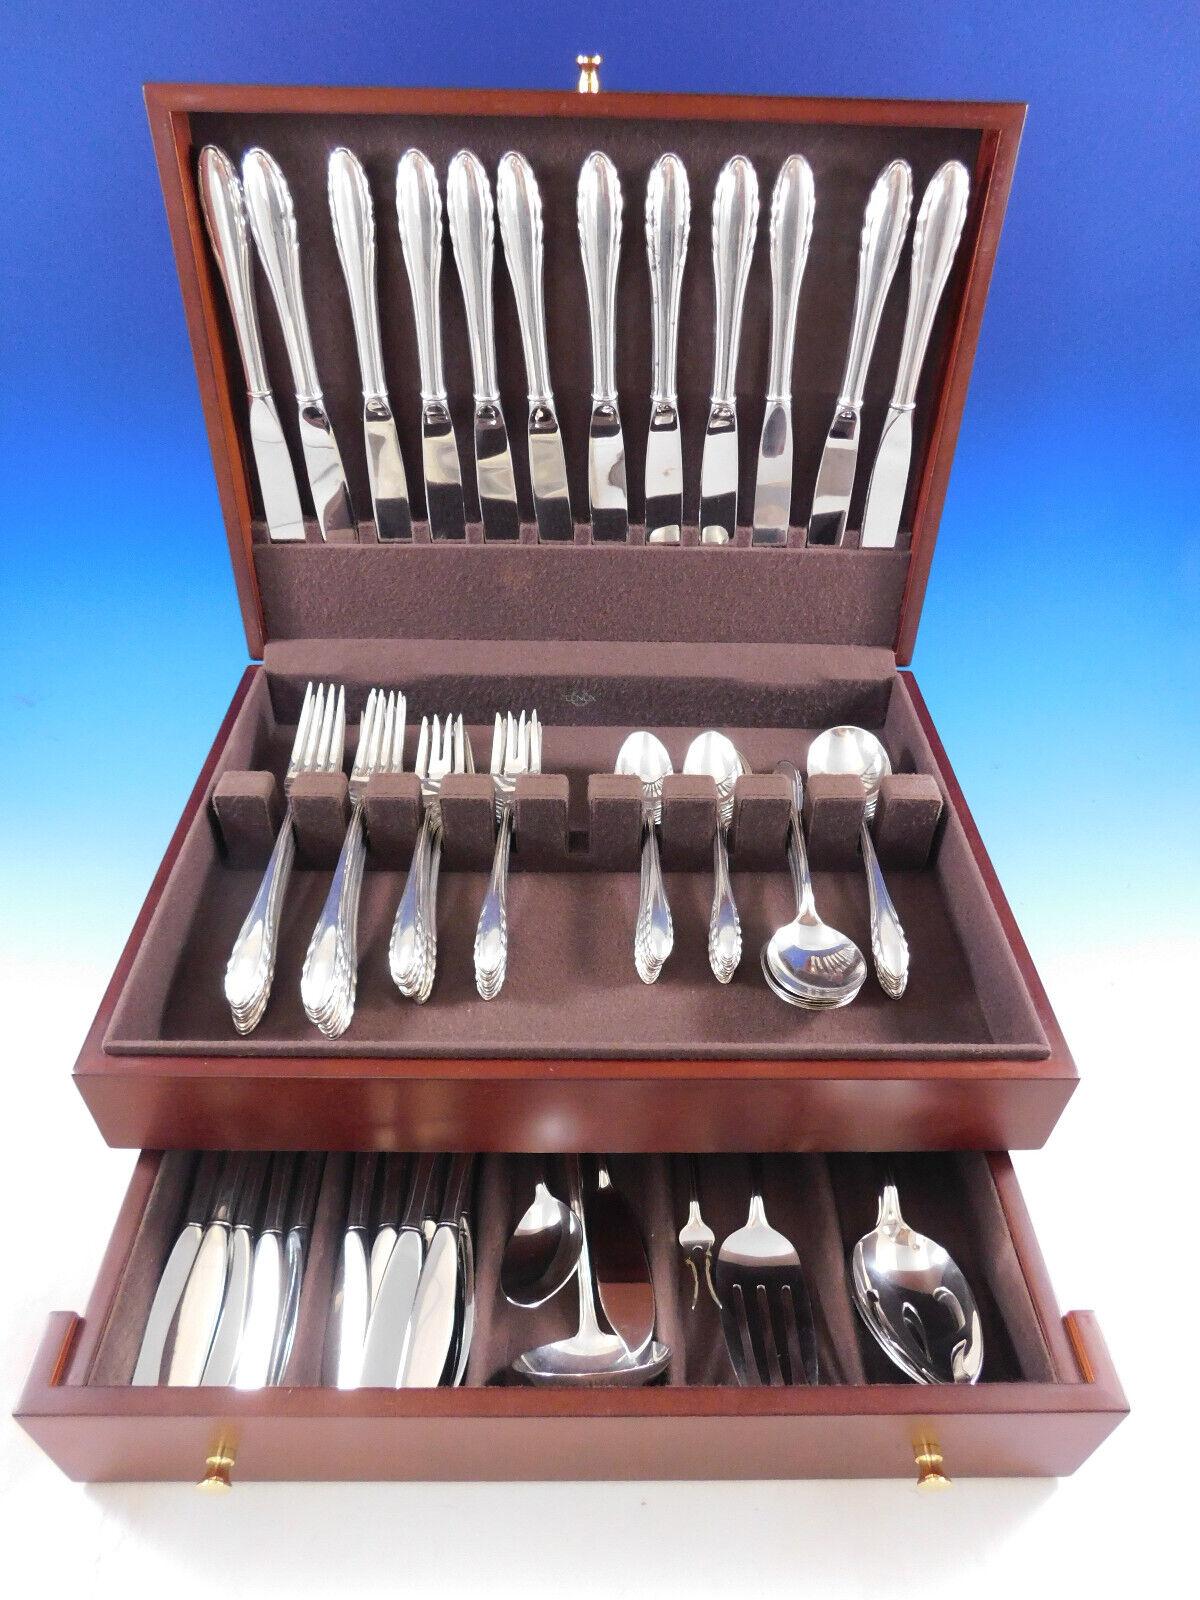 Dinner size Lyric by Gorham sterling silver flatware set, 79 pieces. This set includes:

12 dinner size knives, 9 5/8